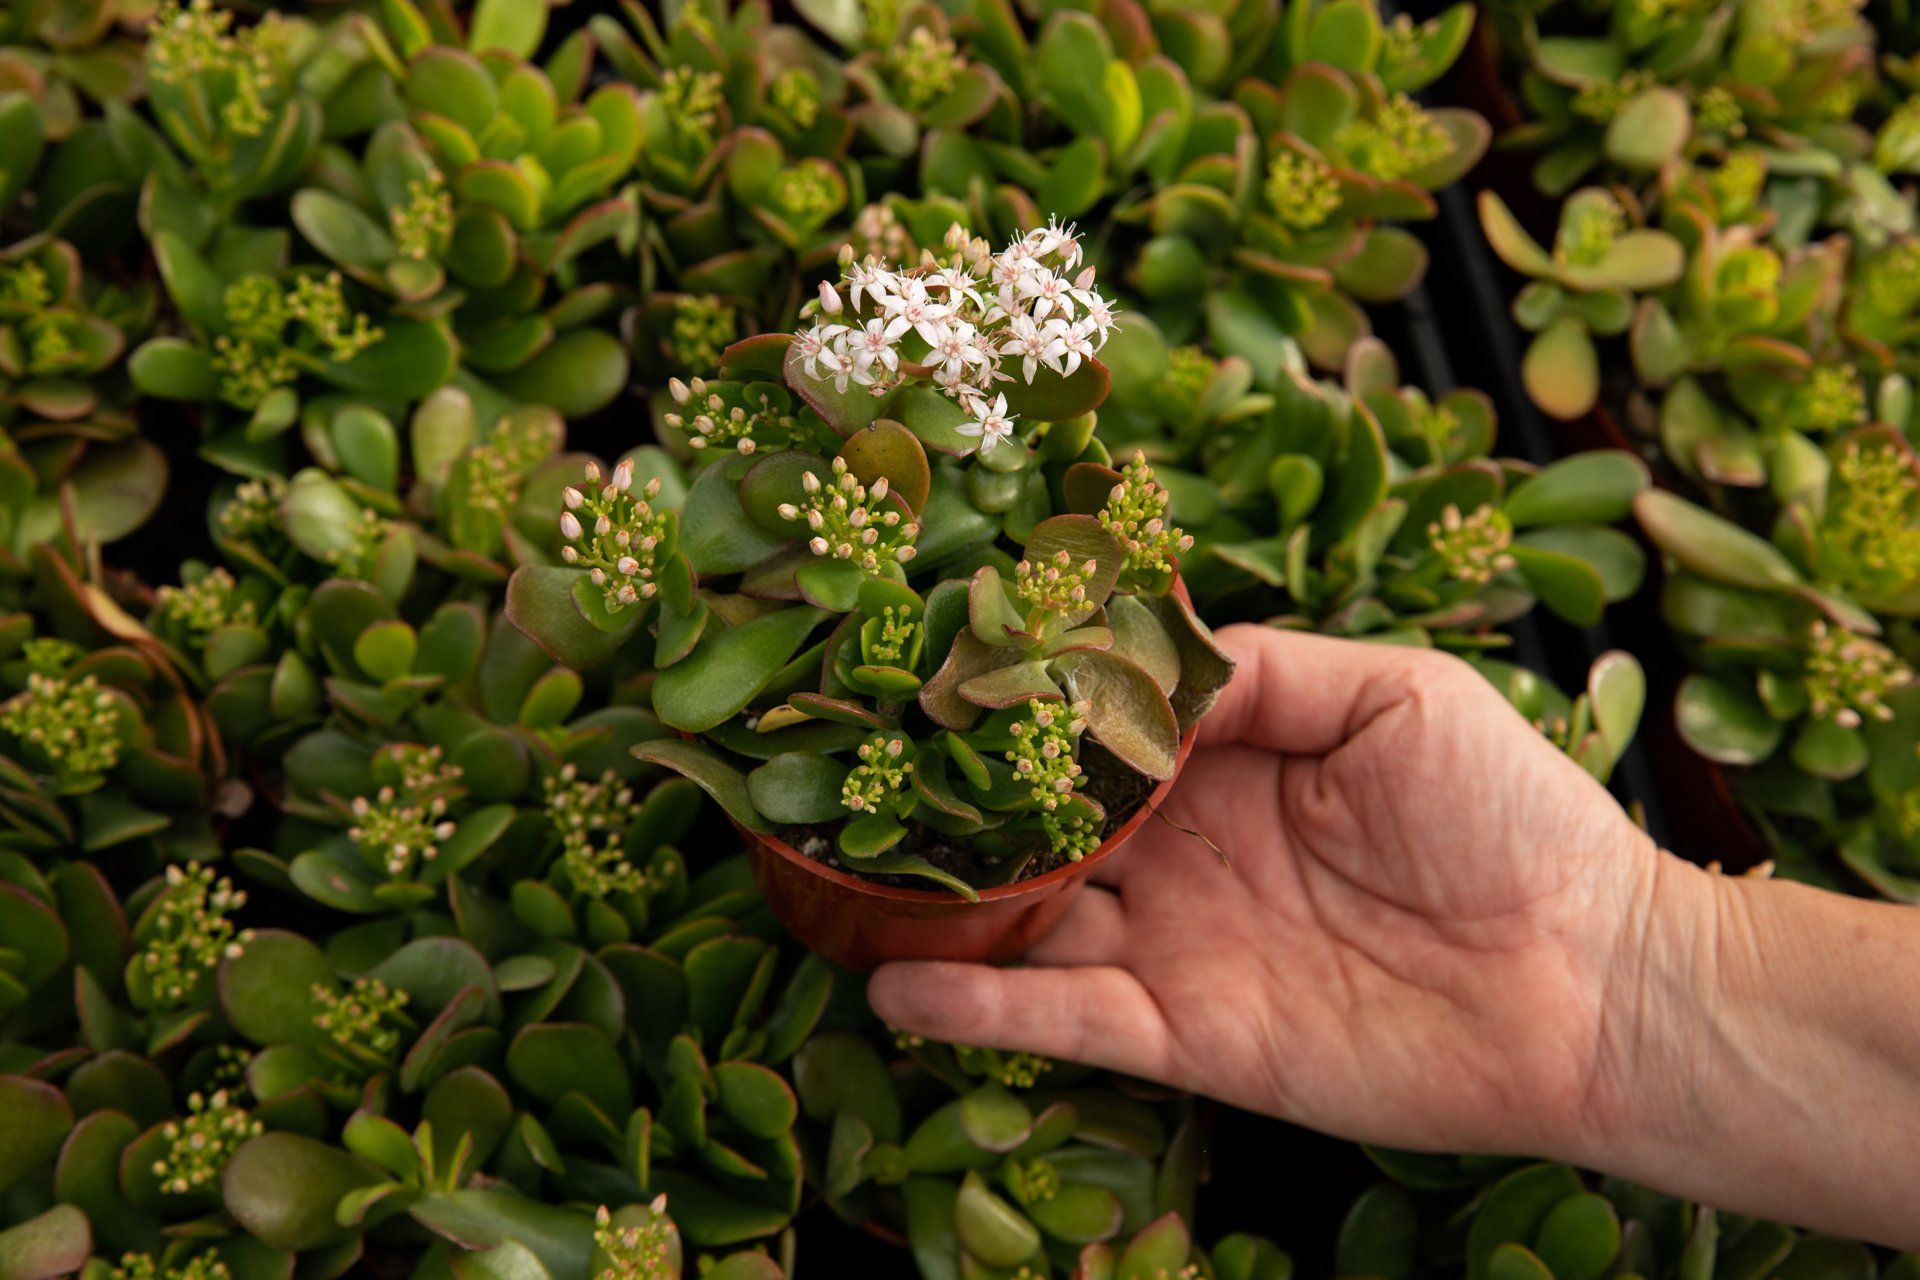 A person is holding a small potted plant with white flowers.